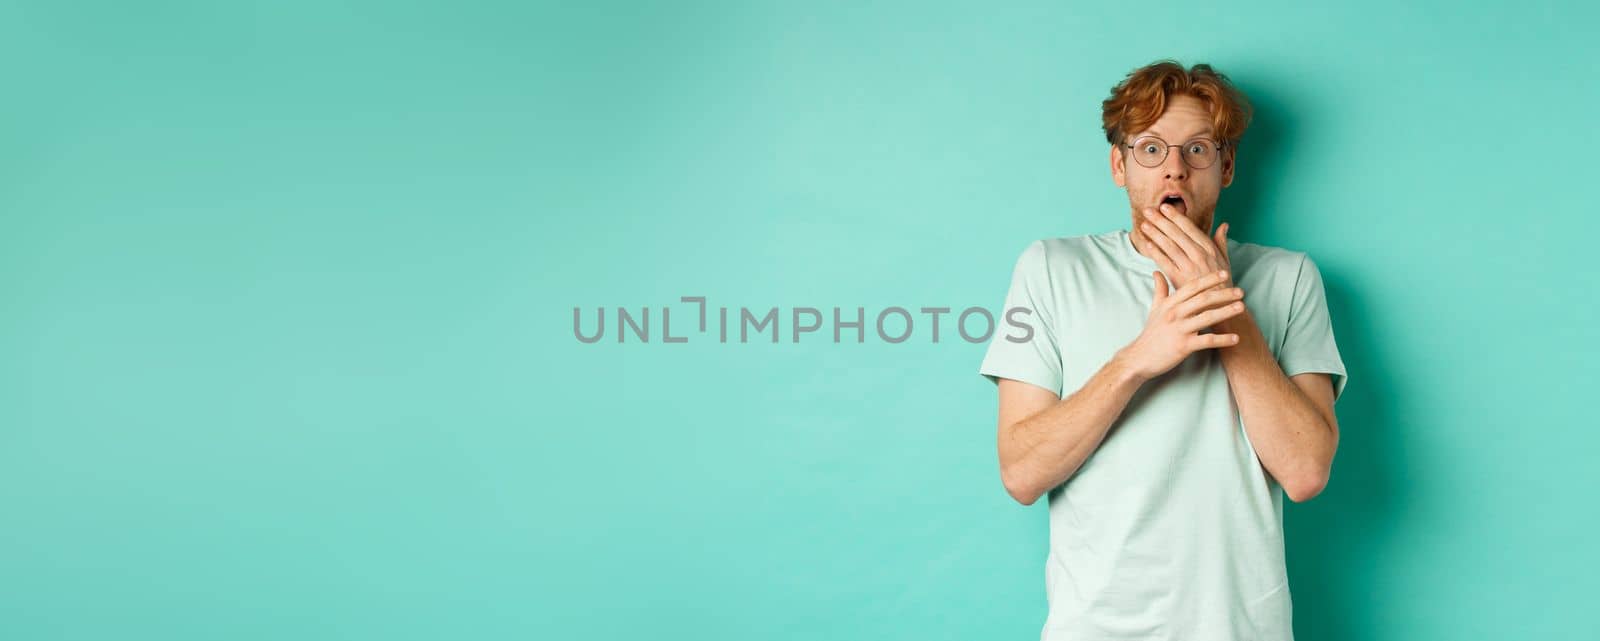 Shocked redhead man in glasses gasping startled, covering mouth and staring at camera scared, standing over turquoise background.